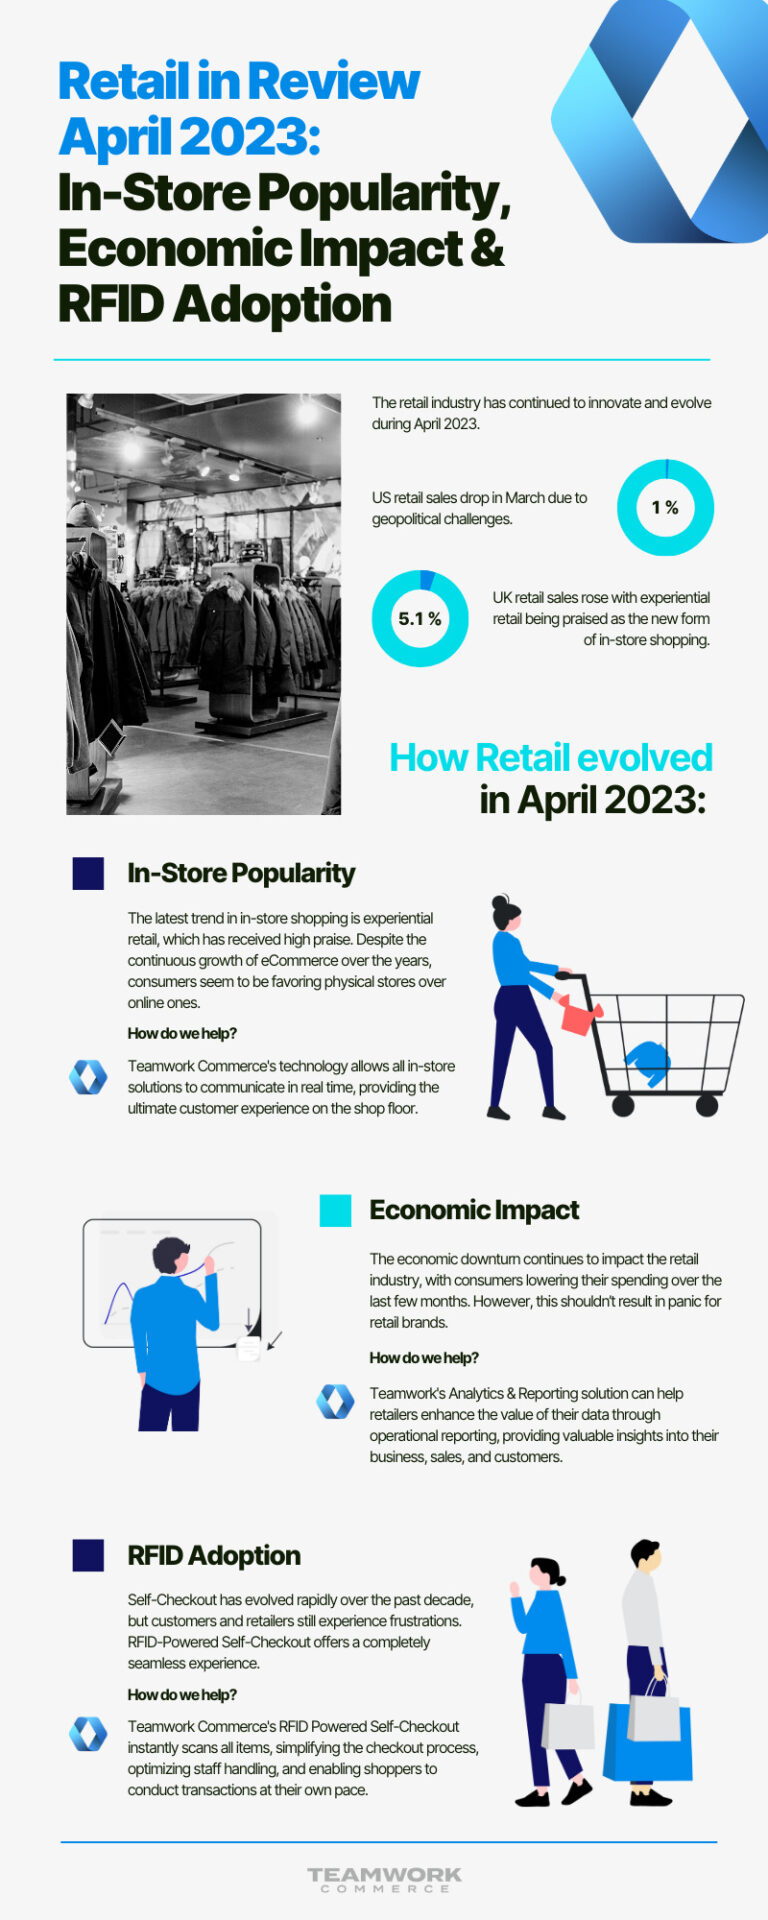 Retail in Review - April 2023: In-Store Popularity, Economic Impact & RFID Adoption